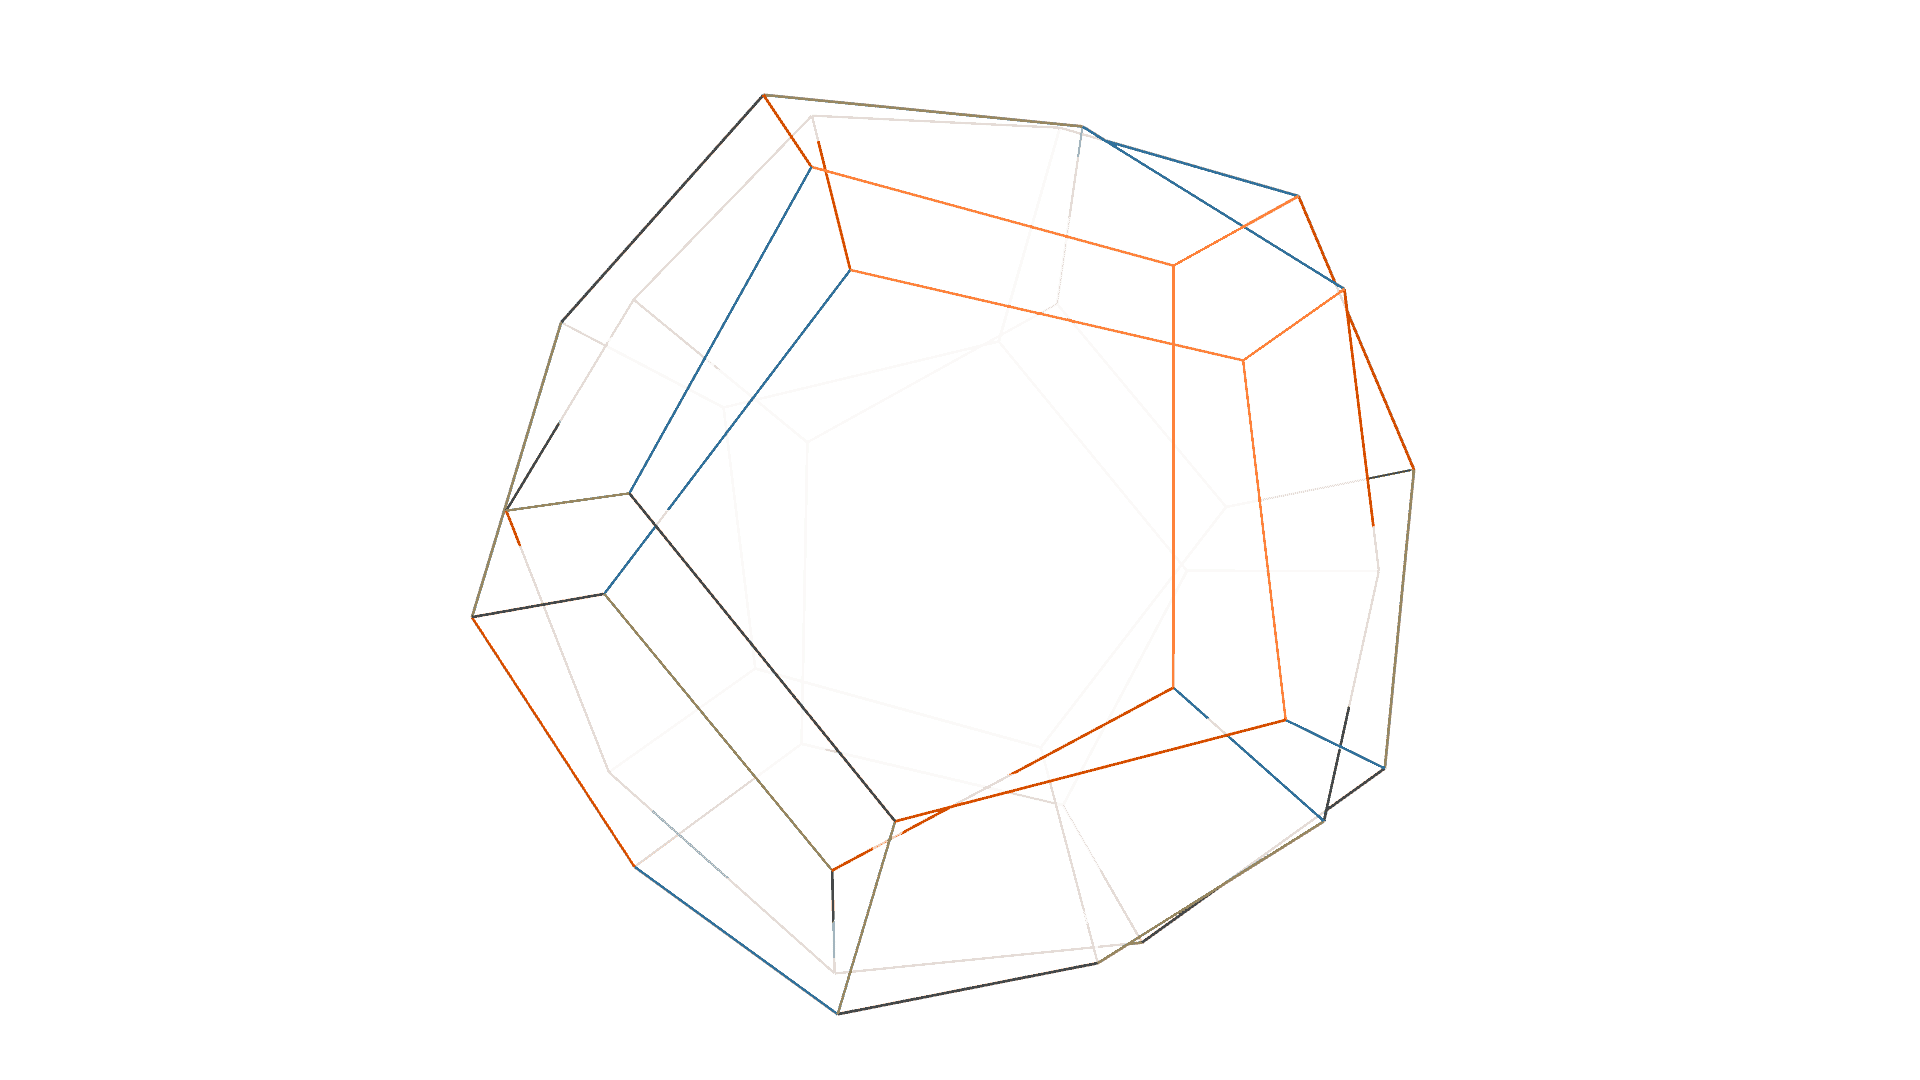 Thumbnail of Decagonal Double Cover Dodecahedral Net